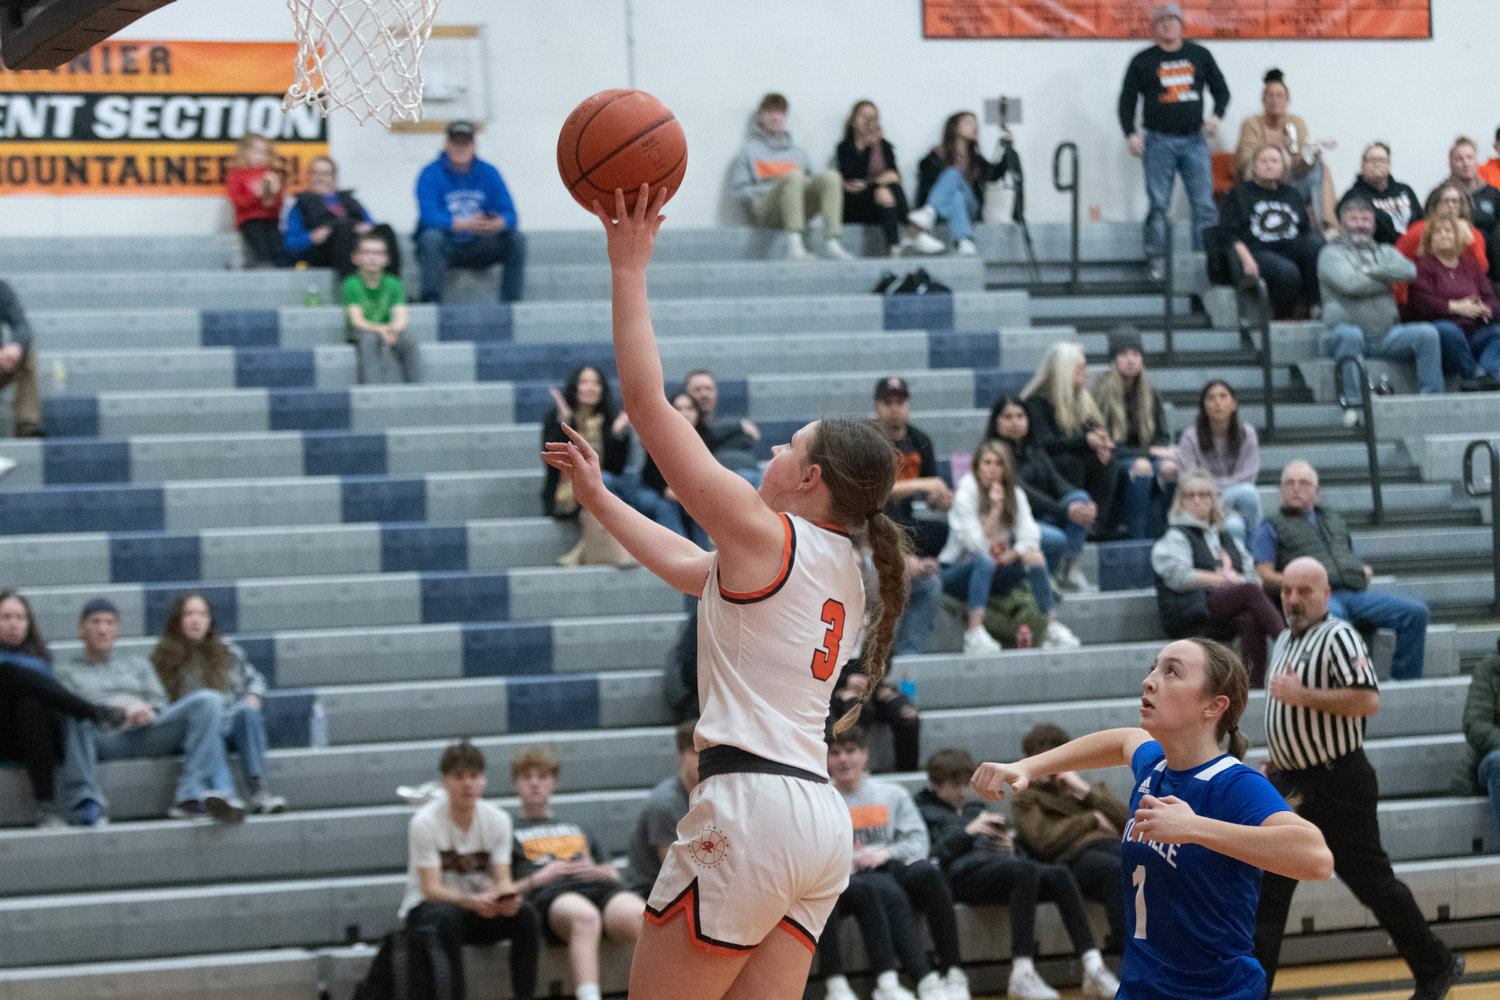 Brooklynn Swenson puts in a layup during the frst quarter of Rainier's win over Eatonville on Jan. 7.